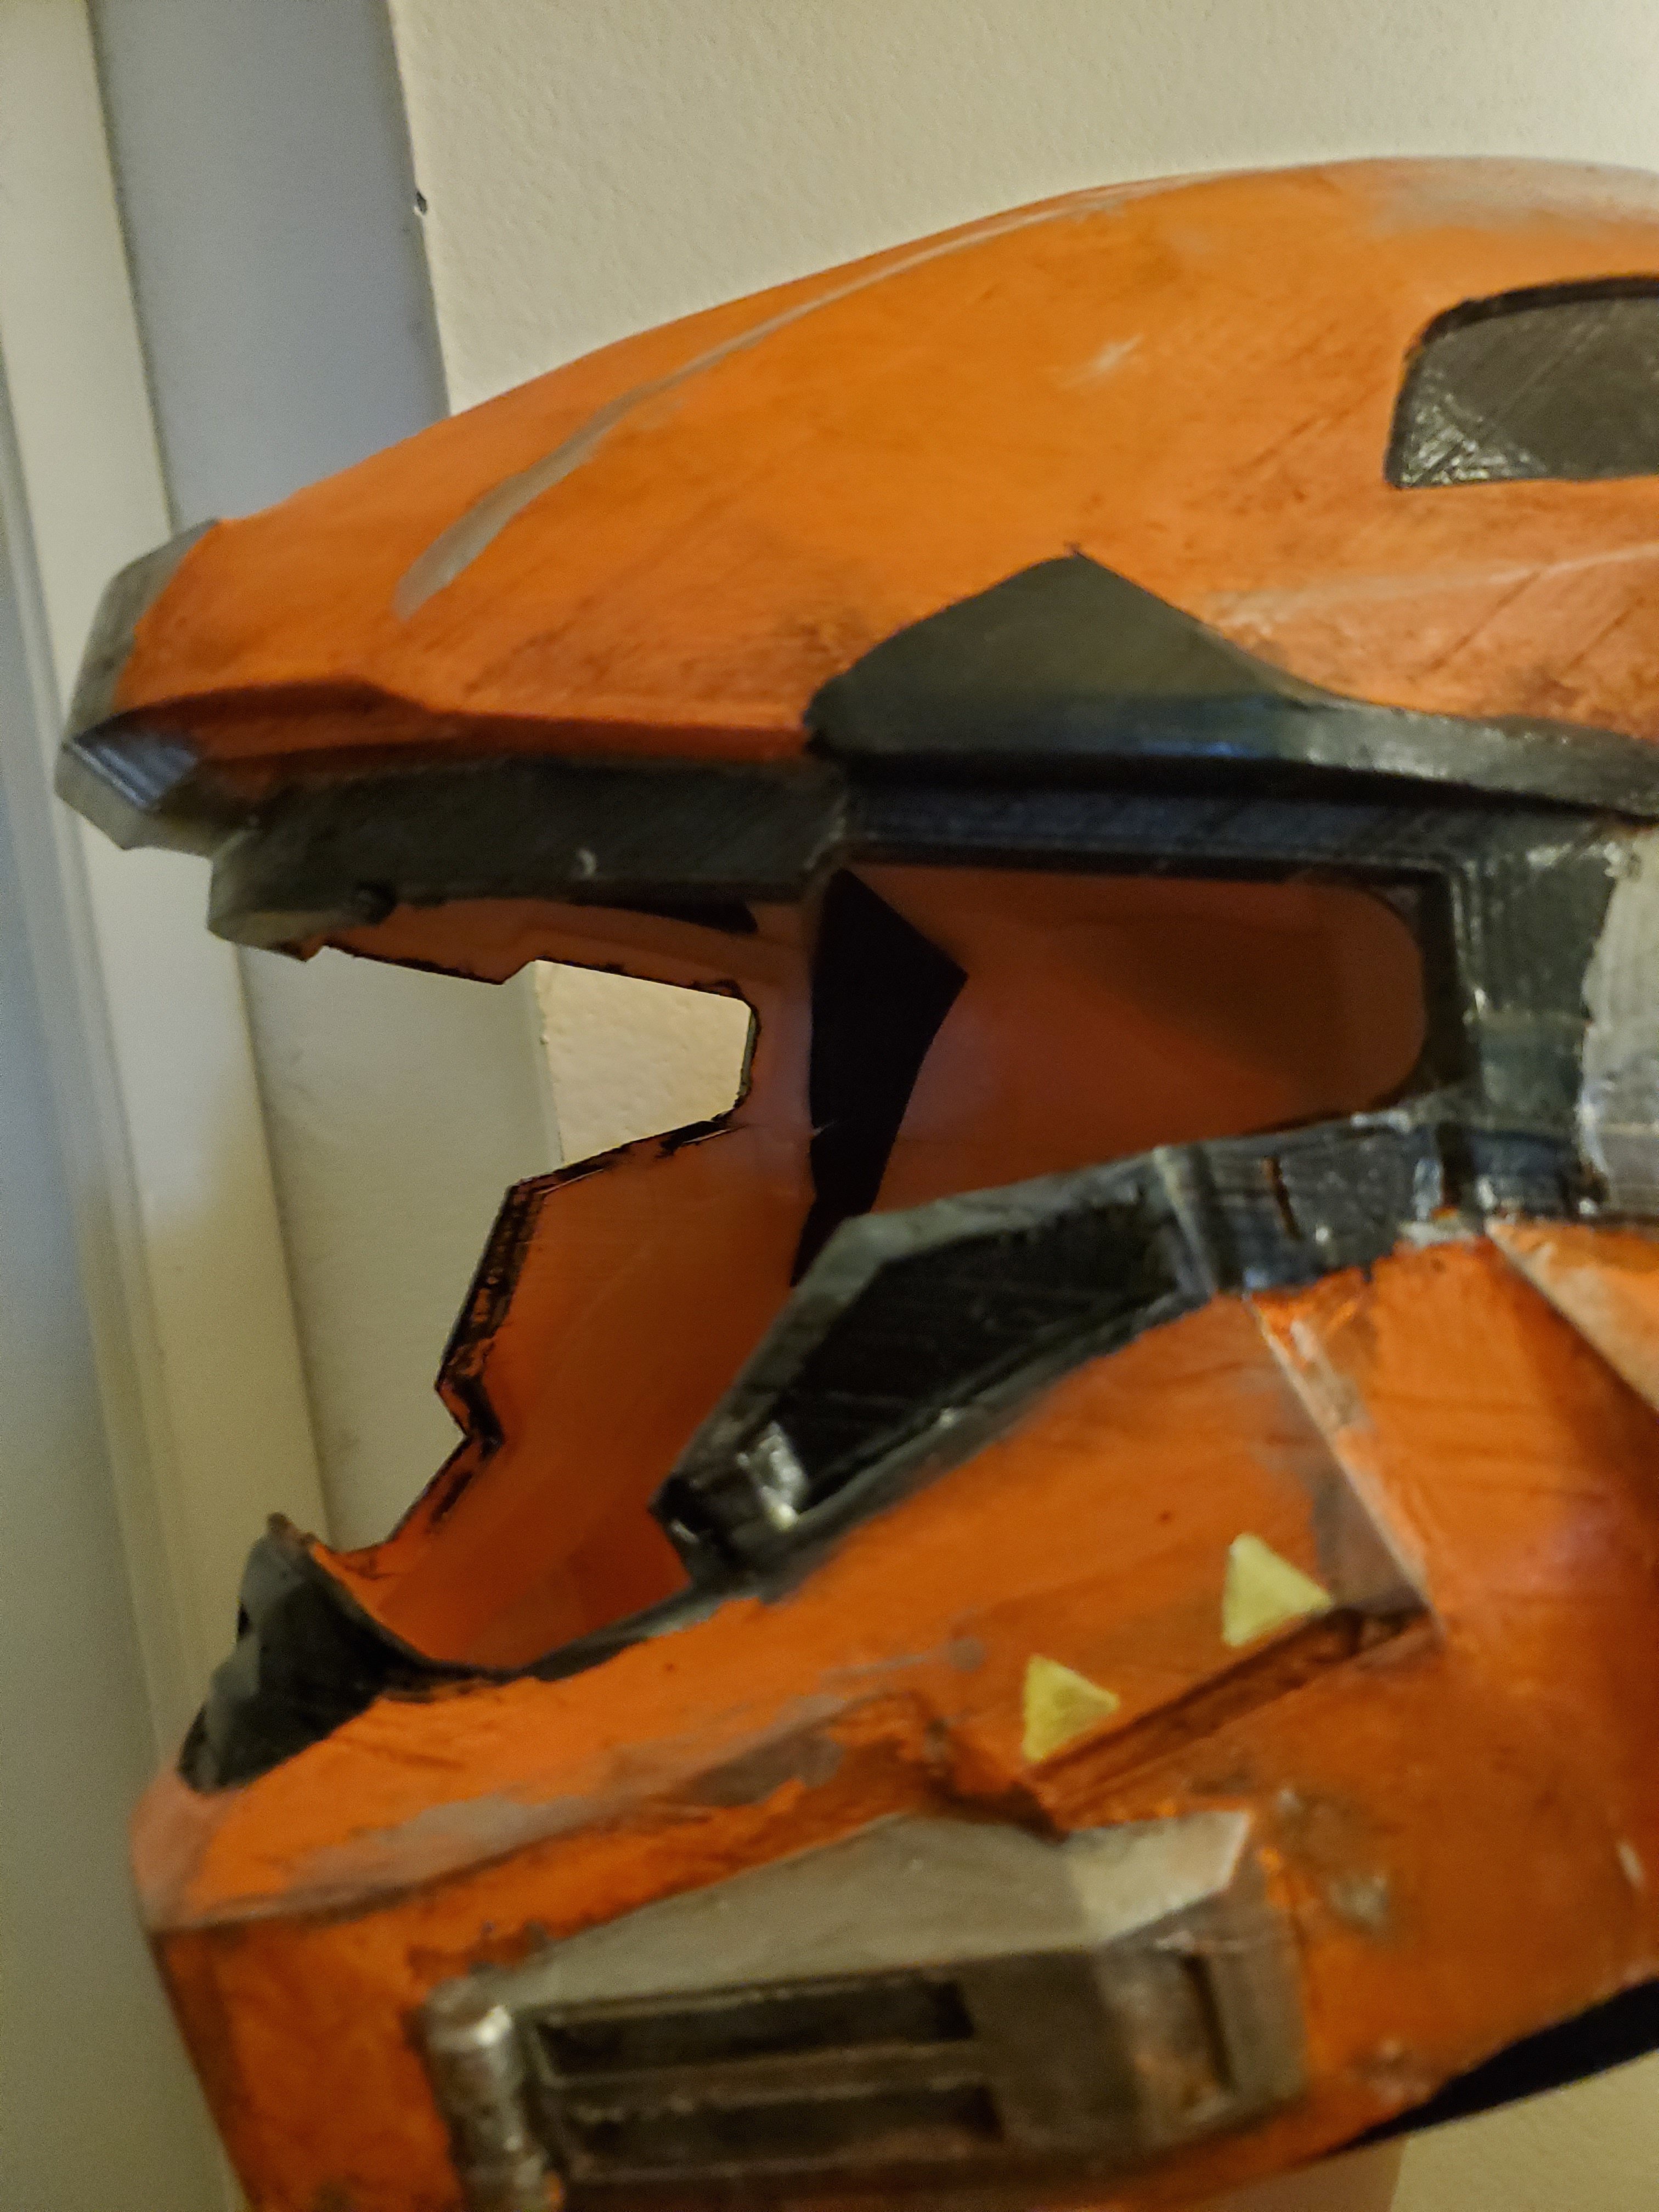 ButterBacon300's Noble Six Armor 3d Print and Foam Build | Page 2 ...